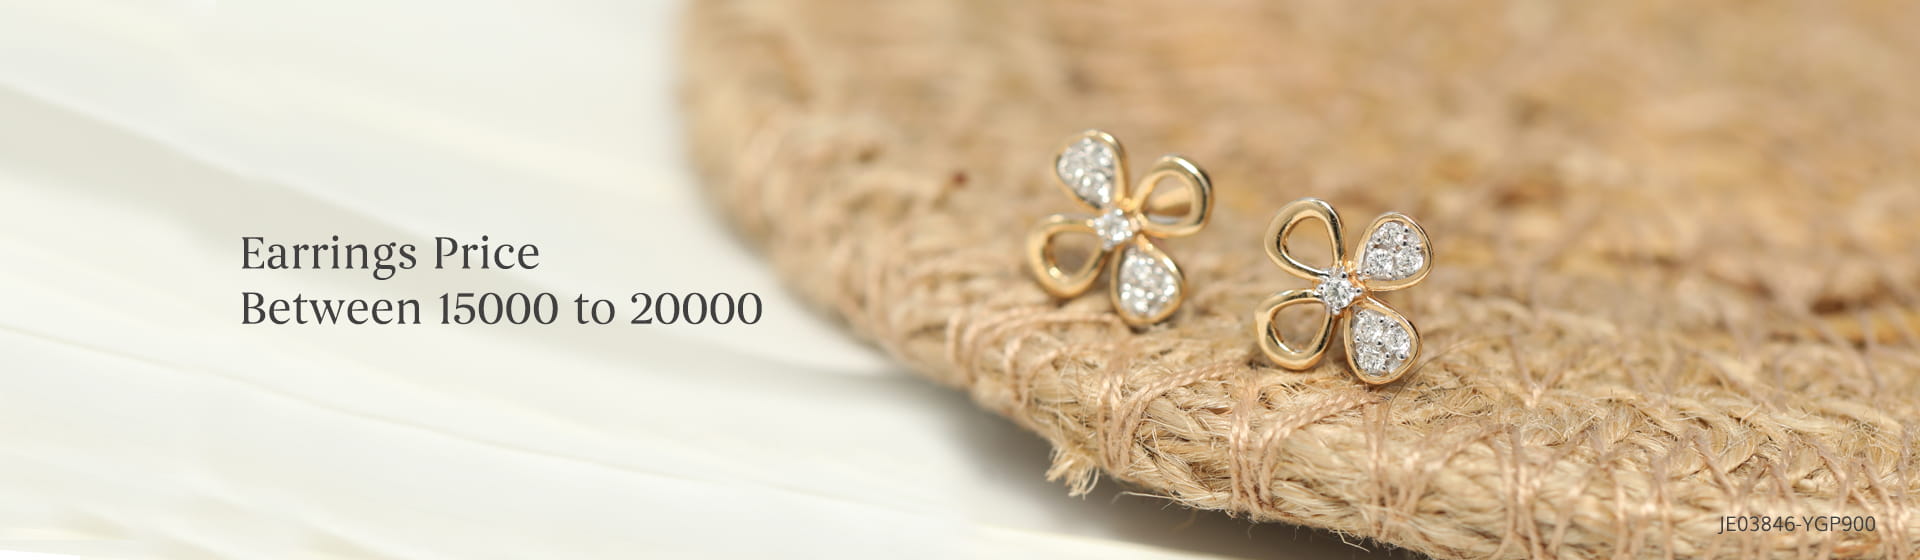 Shop Gold and Diamond Earrings Price Between 15000 to 20000 Online